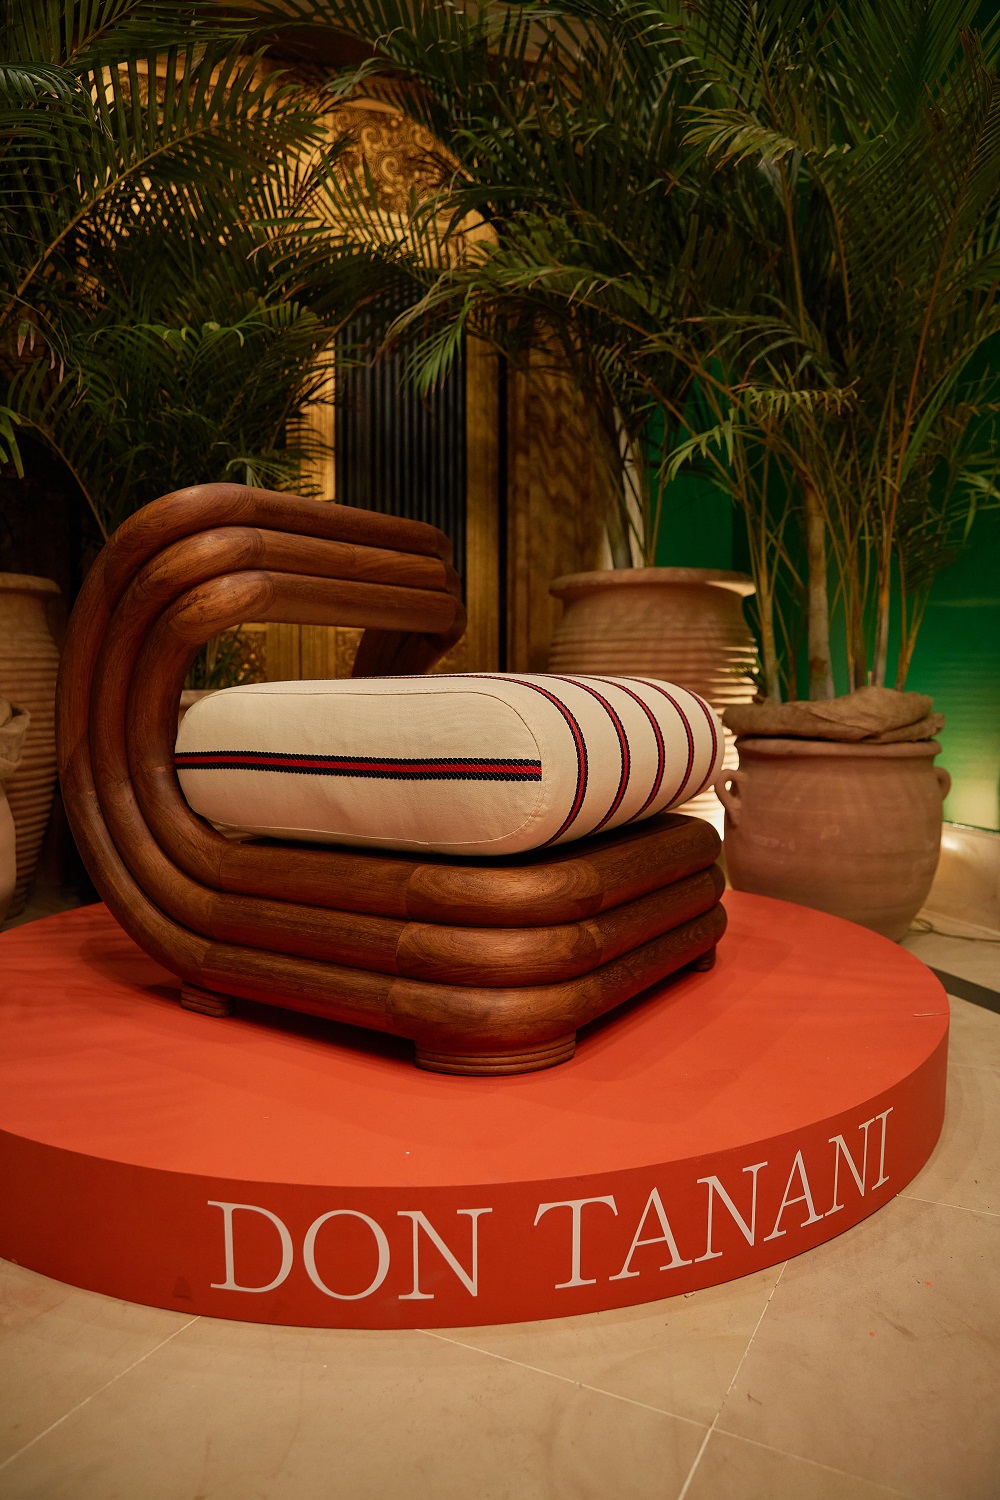 A chair from the Moruna by Don Tanani collection.